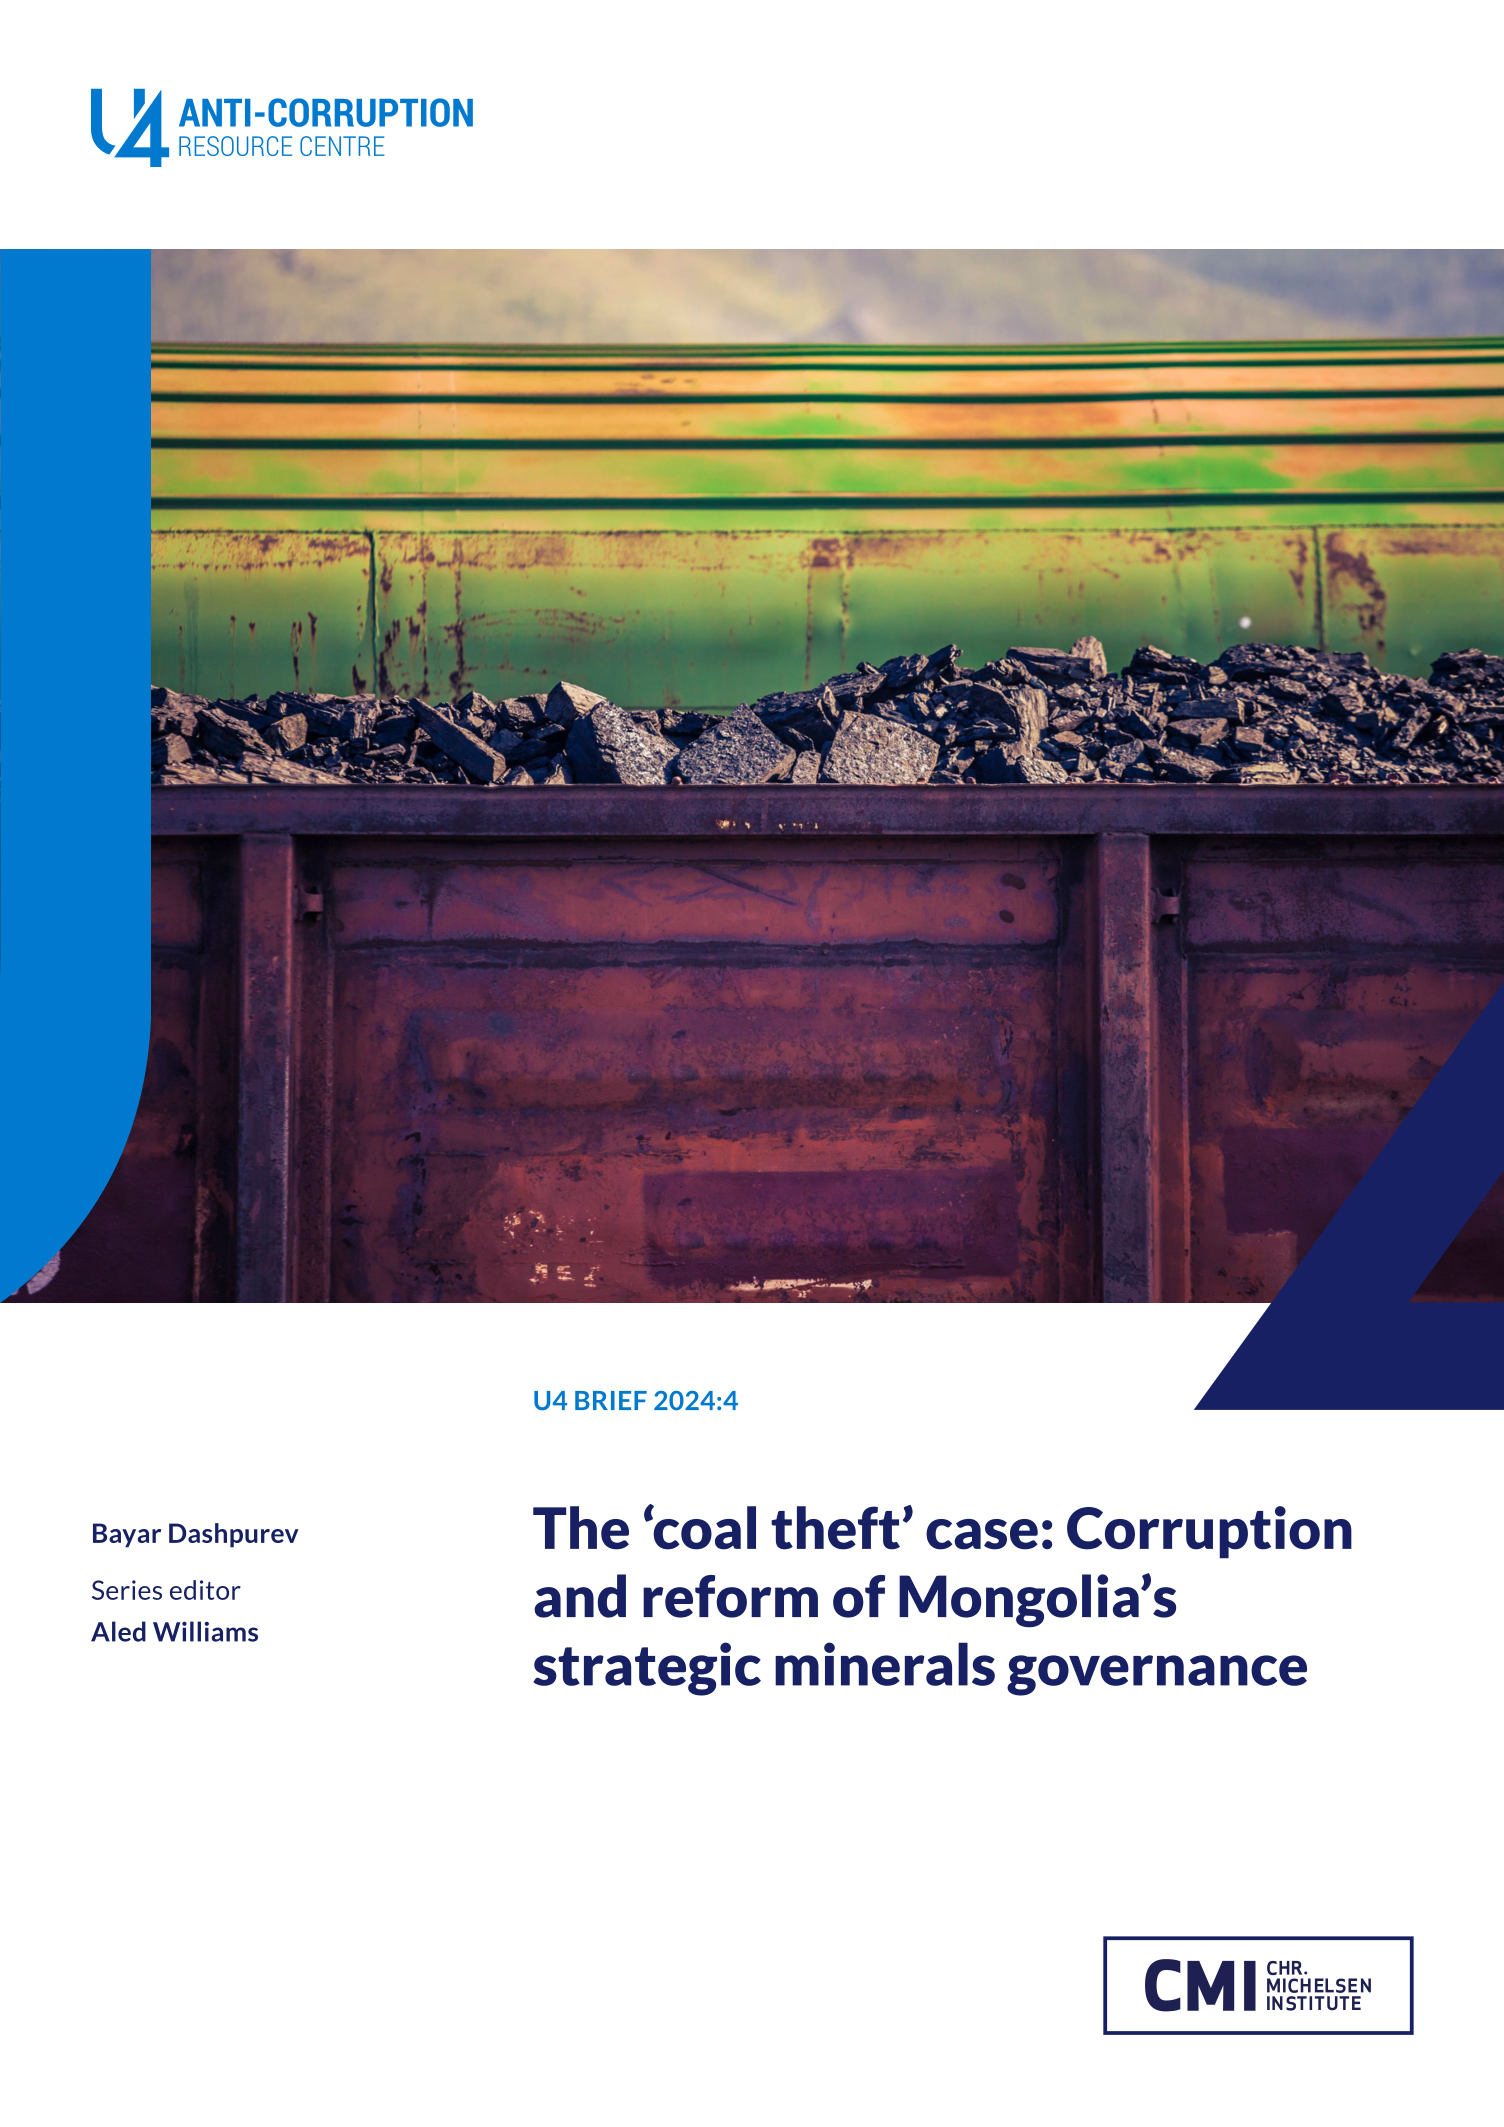 The ‘coal theft’ case: Corruption and reform of Mongolia’s strategic minerals governance